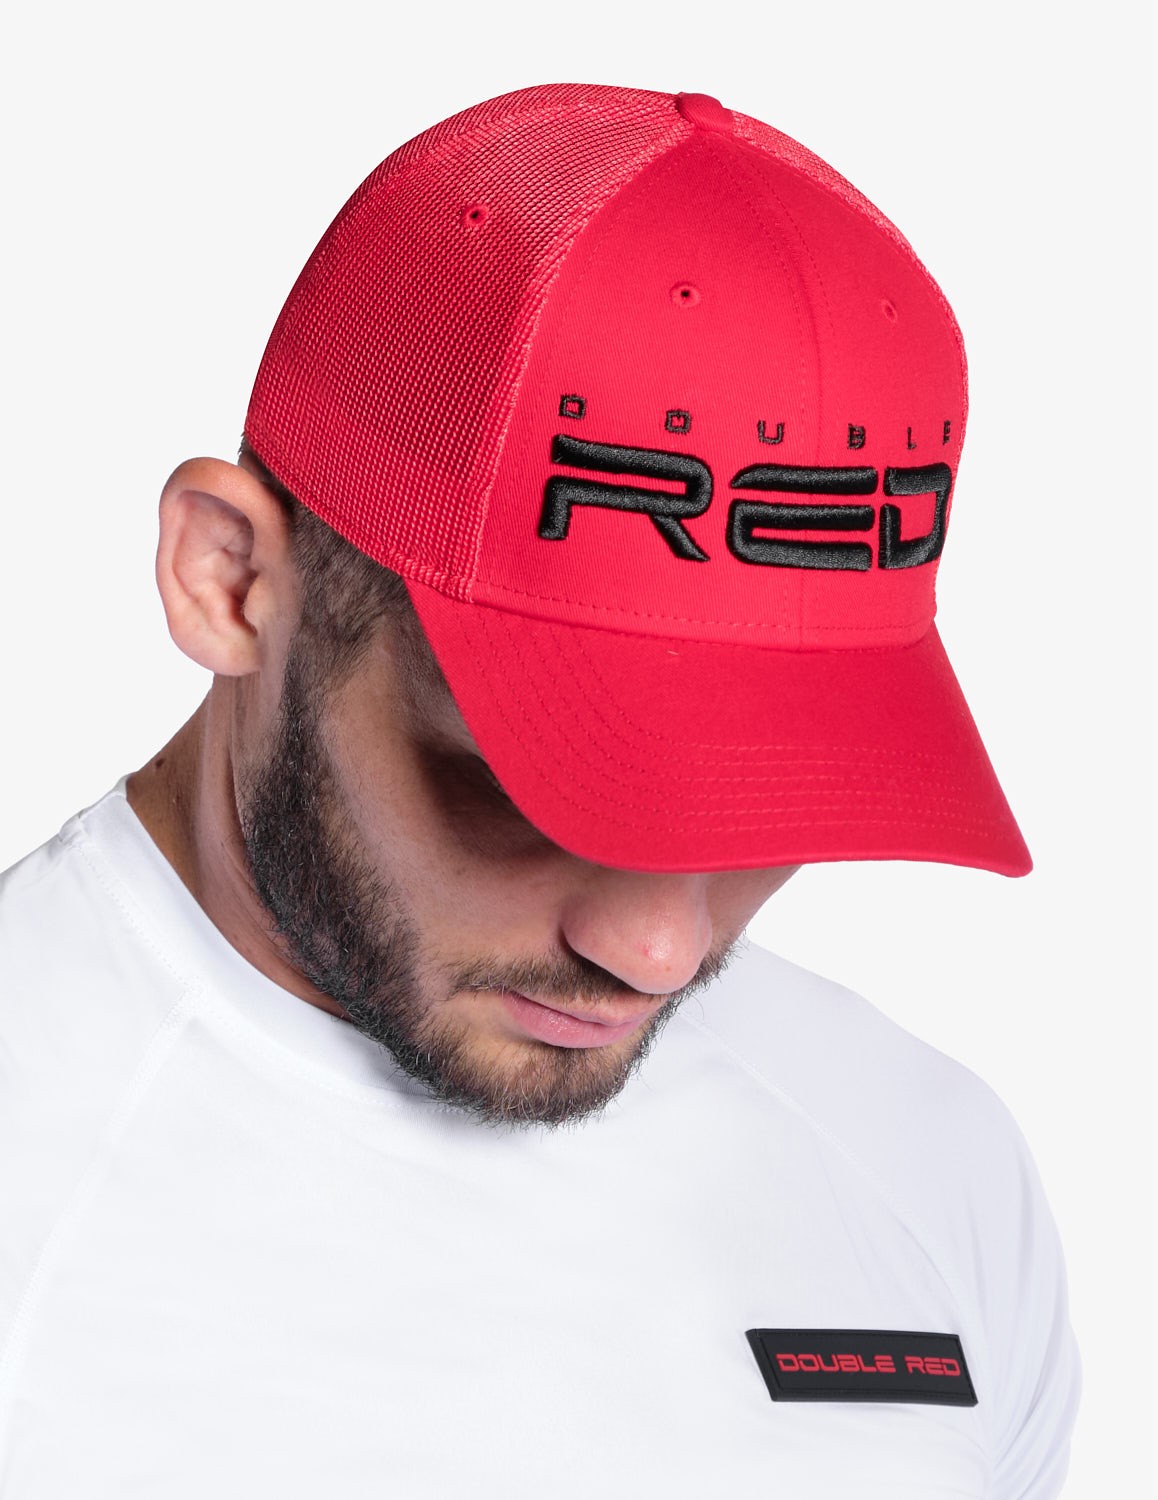 DOUBLE RED Airtech Mesh Cap Red/Black